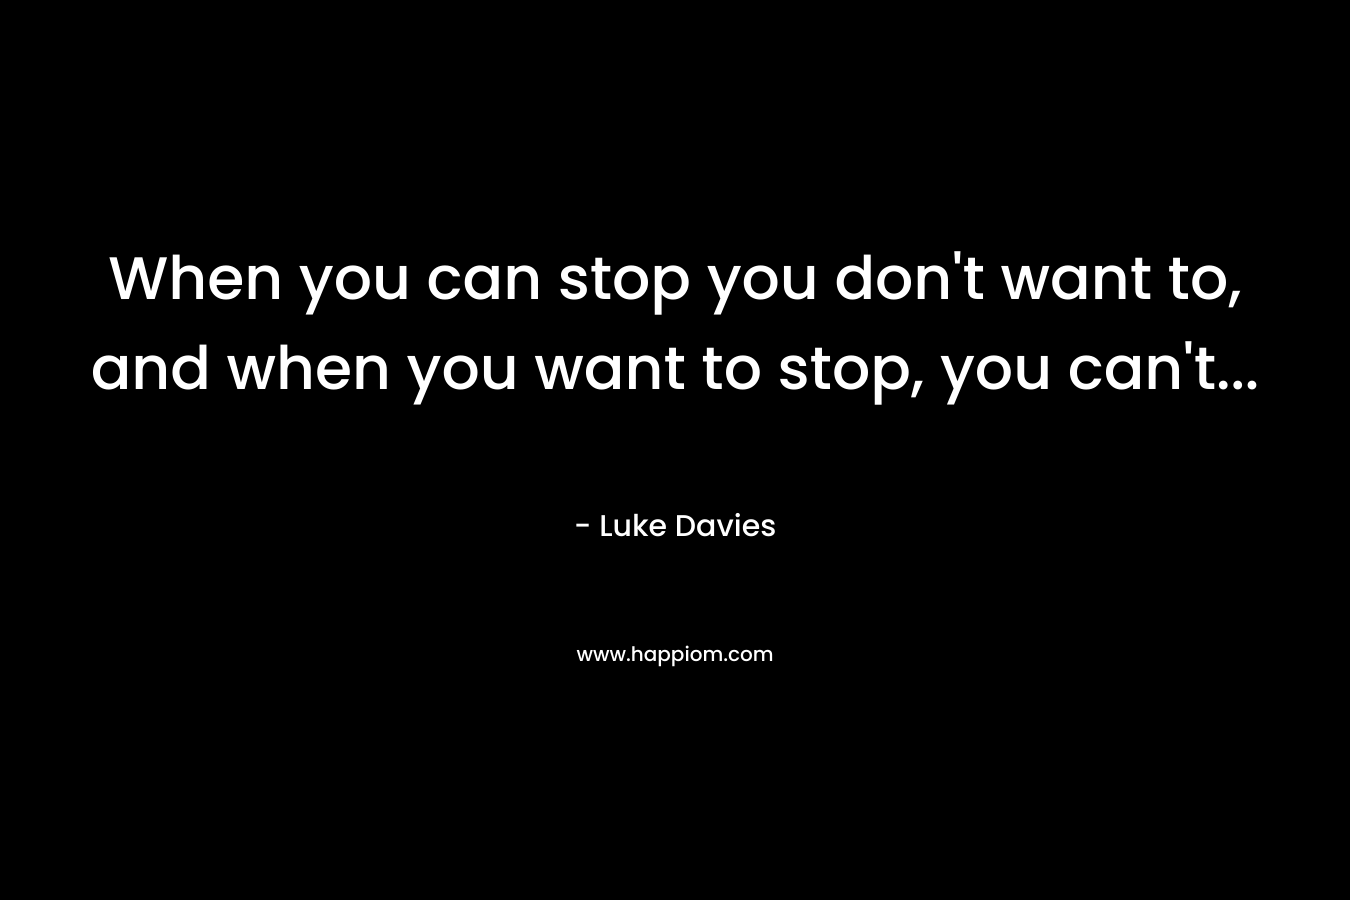 When you can stop you don’t want to, and when you want to stop, you can’t… – Luke Davies